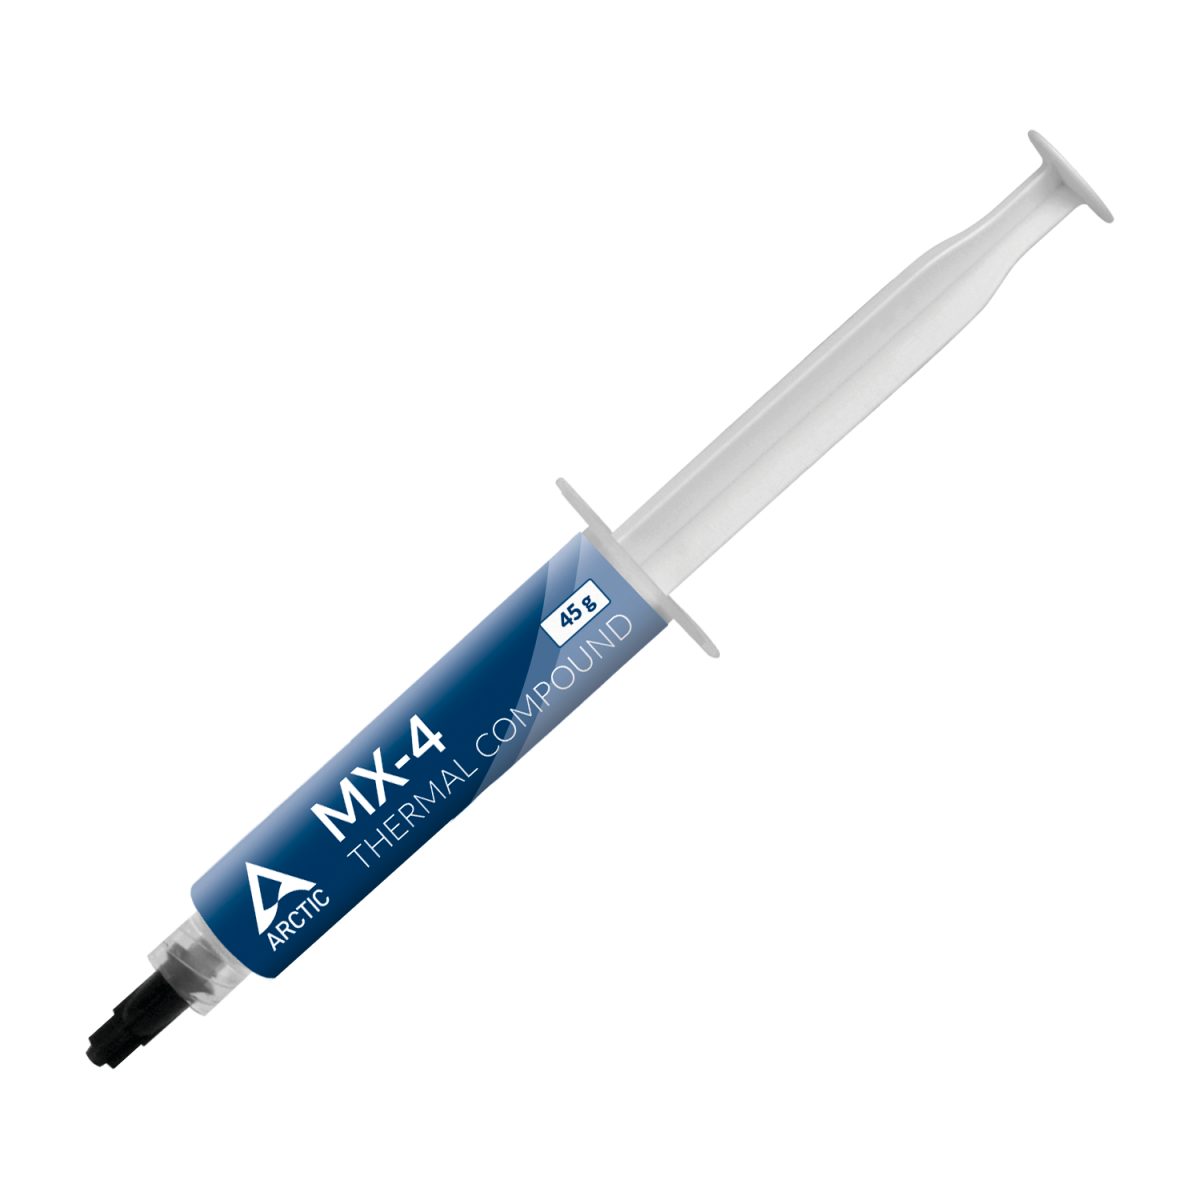 ARCTIC MX-4 45g - High Performance Thermal Compound - Arctic 2.35.64.01.027